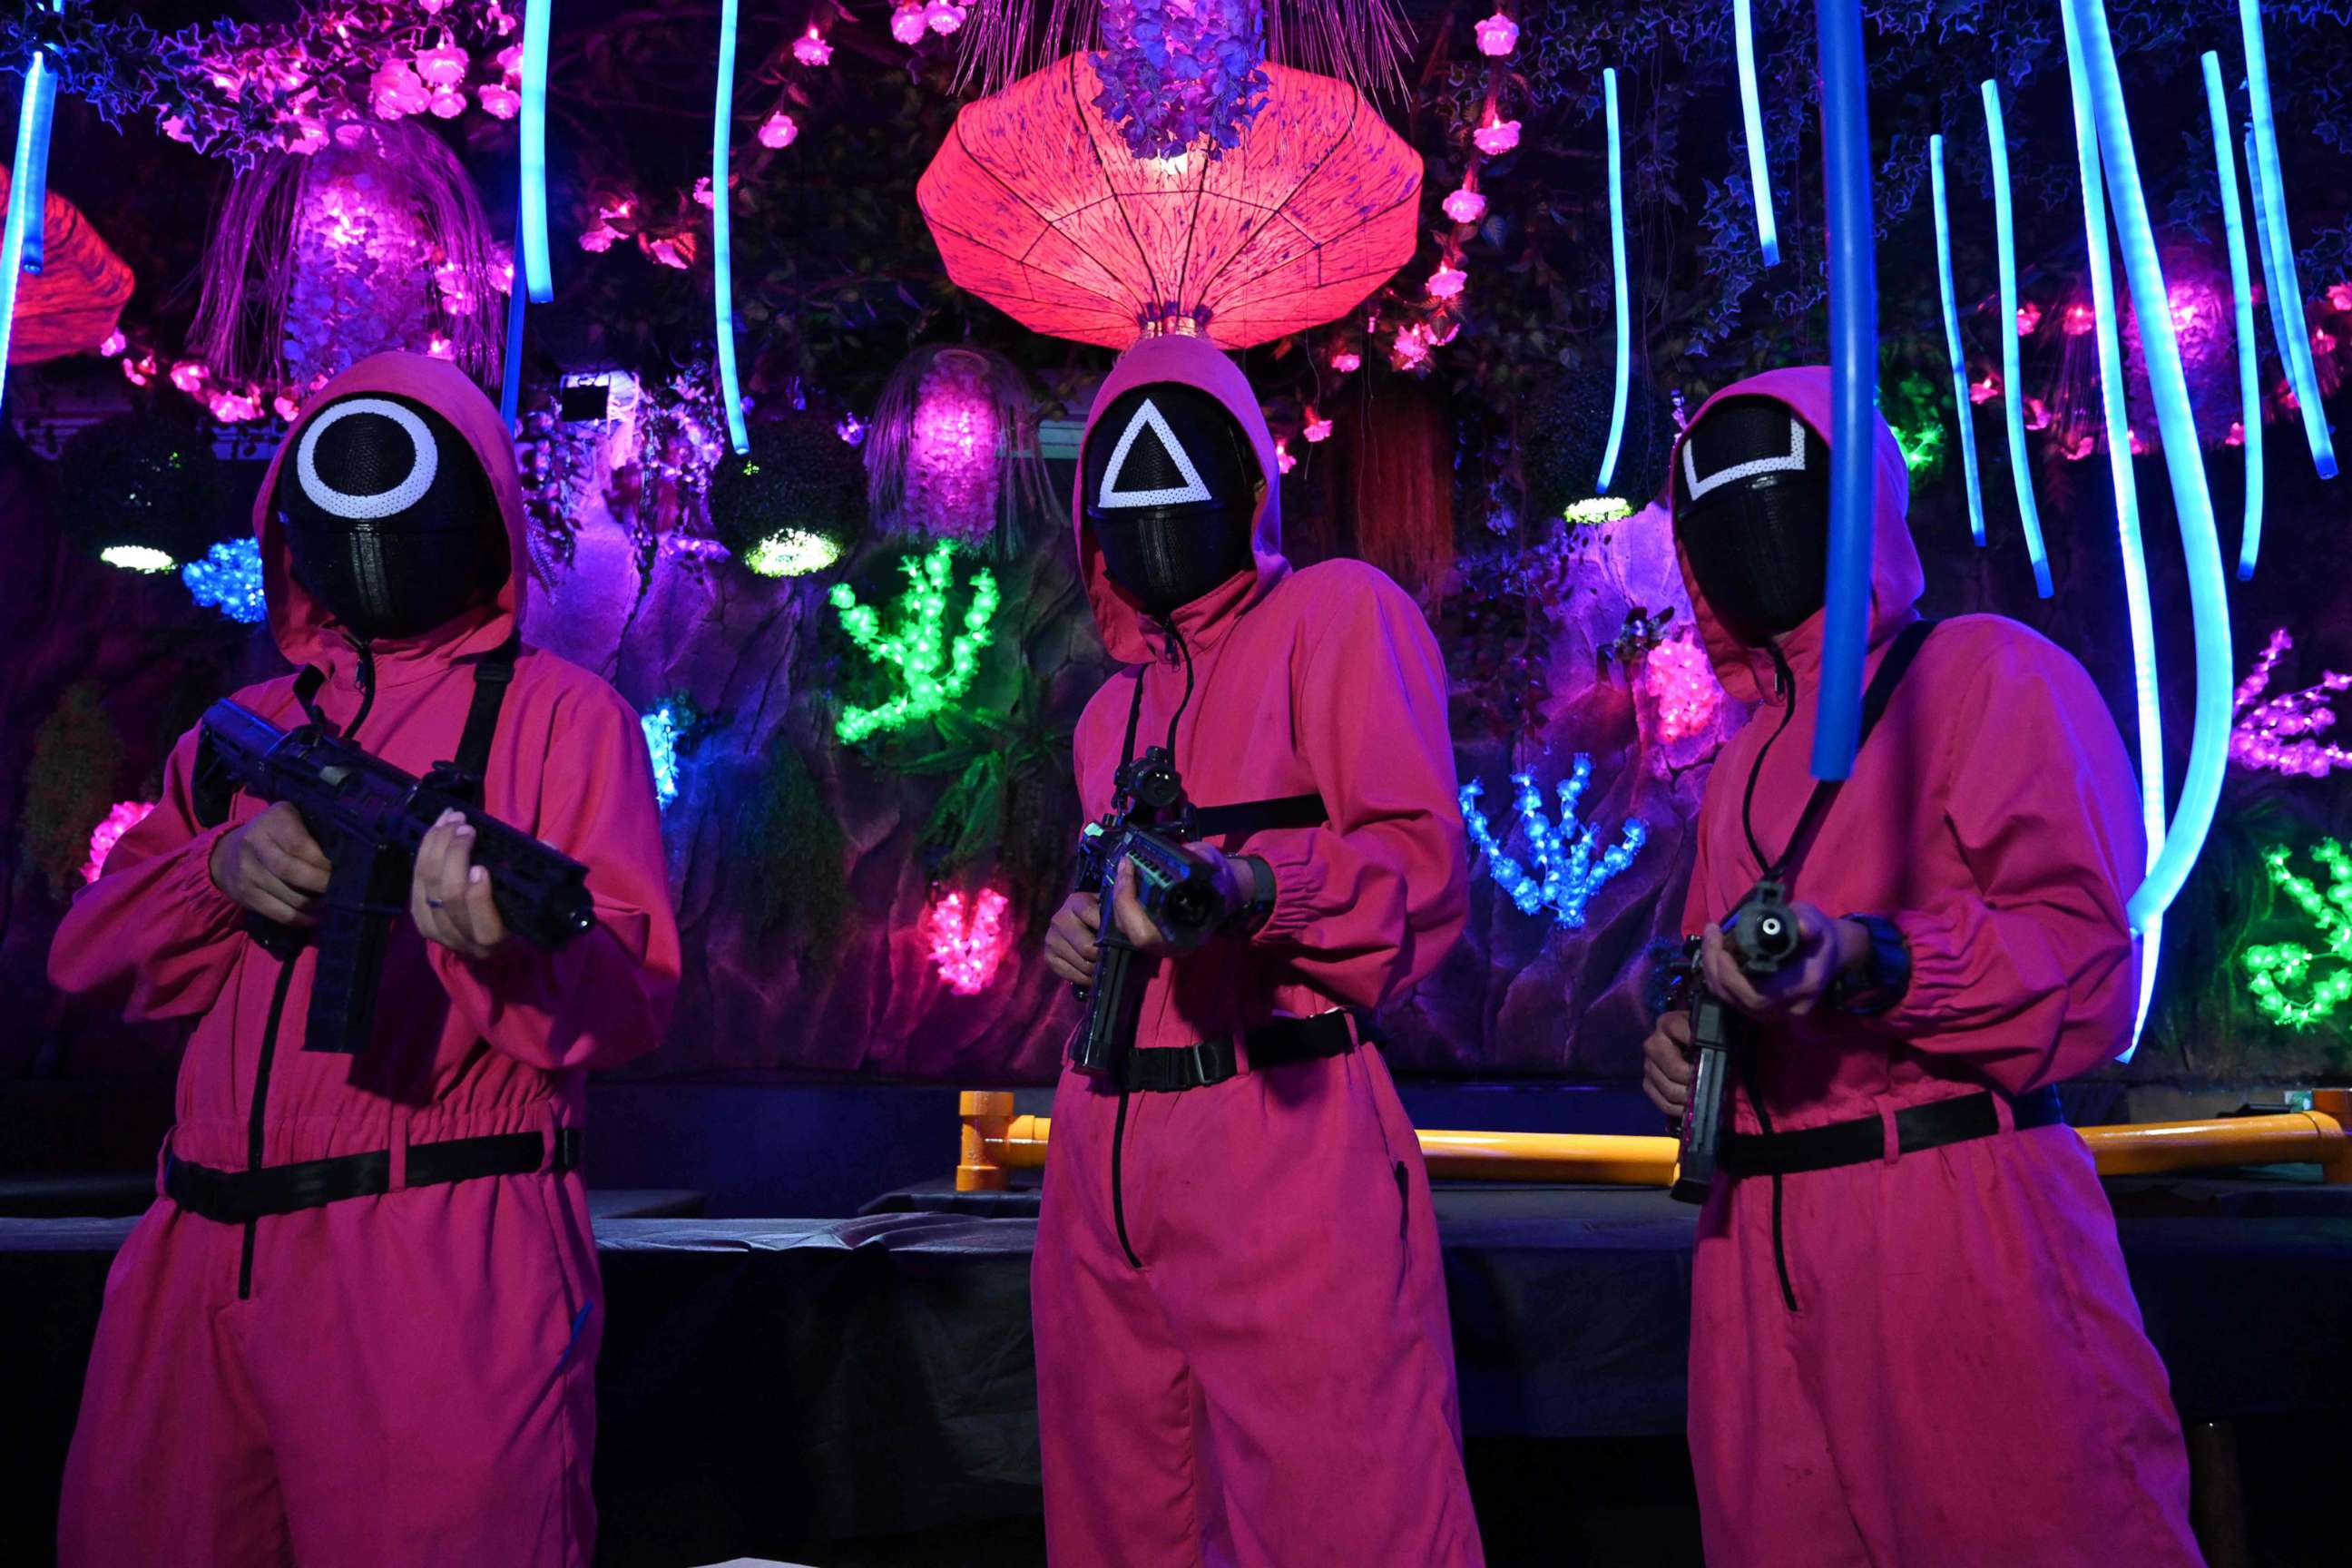 PHOTO: Waiters dressed in outfits from the Netflix series "Squid Game" pose while playing a game to attract customers at a cafe in Jakarta, Indonesia on Oct. 19, 2021.